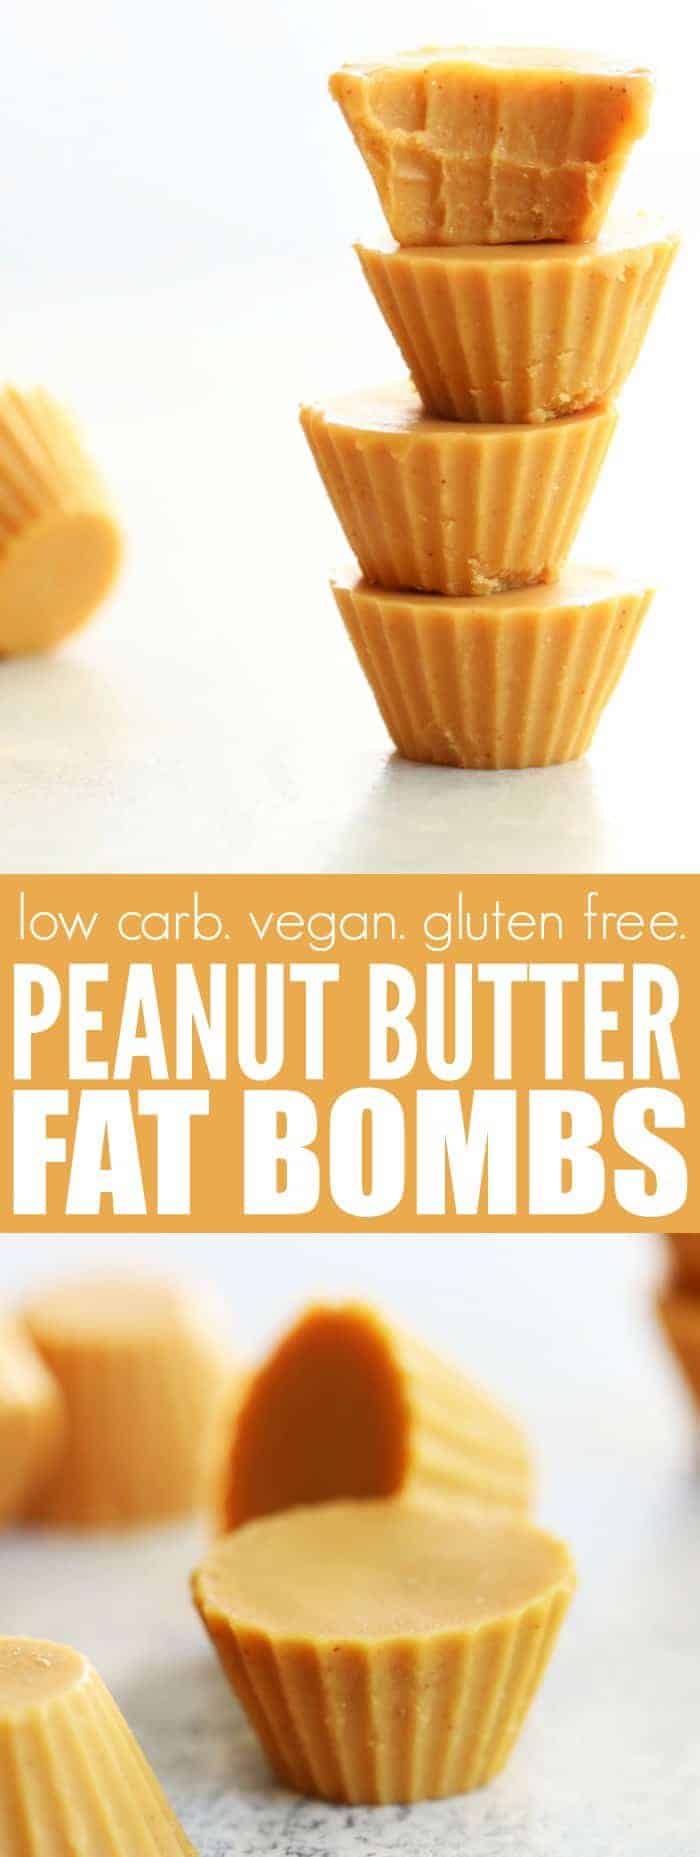 THREE INGREDIENT Peanut Butter Fat Bombs are so delicious! They're low carb, vegan, gluten free, and take care of those sweet tooth cravings!! thetoastedpinenut.com